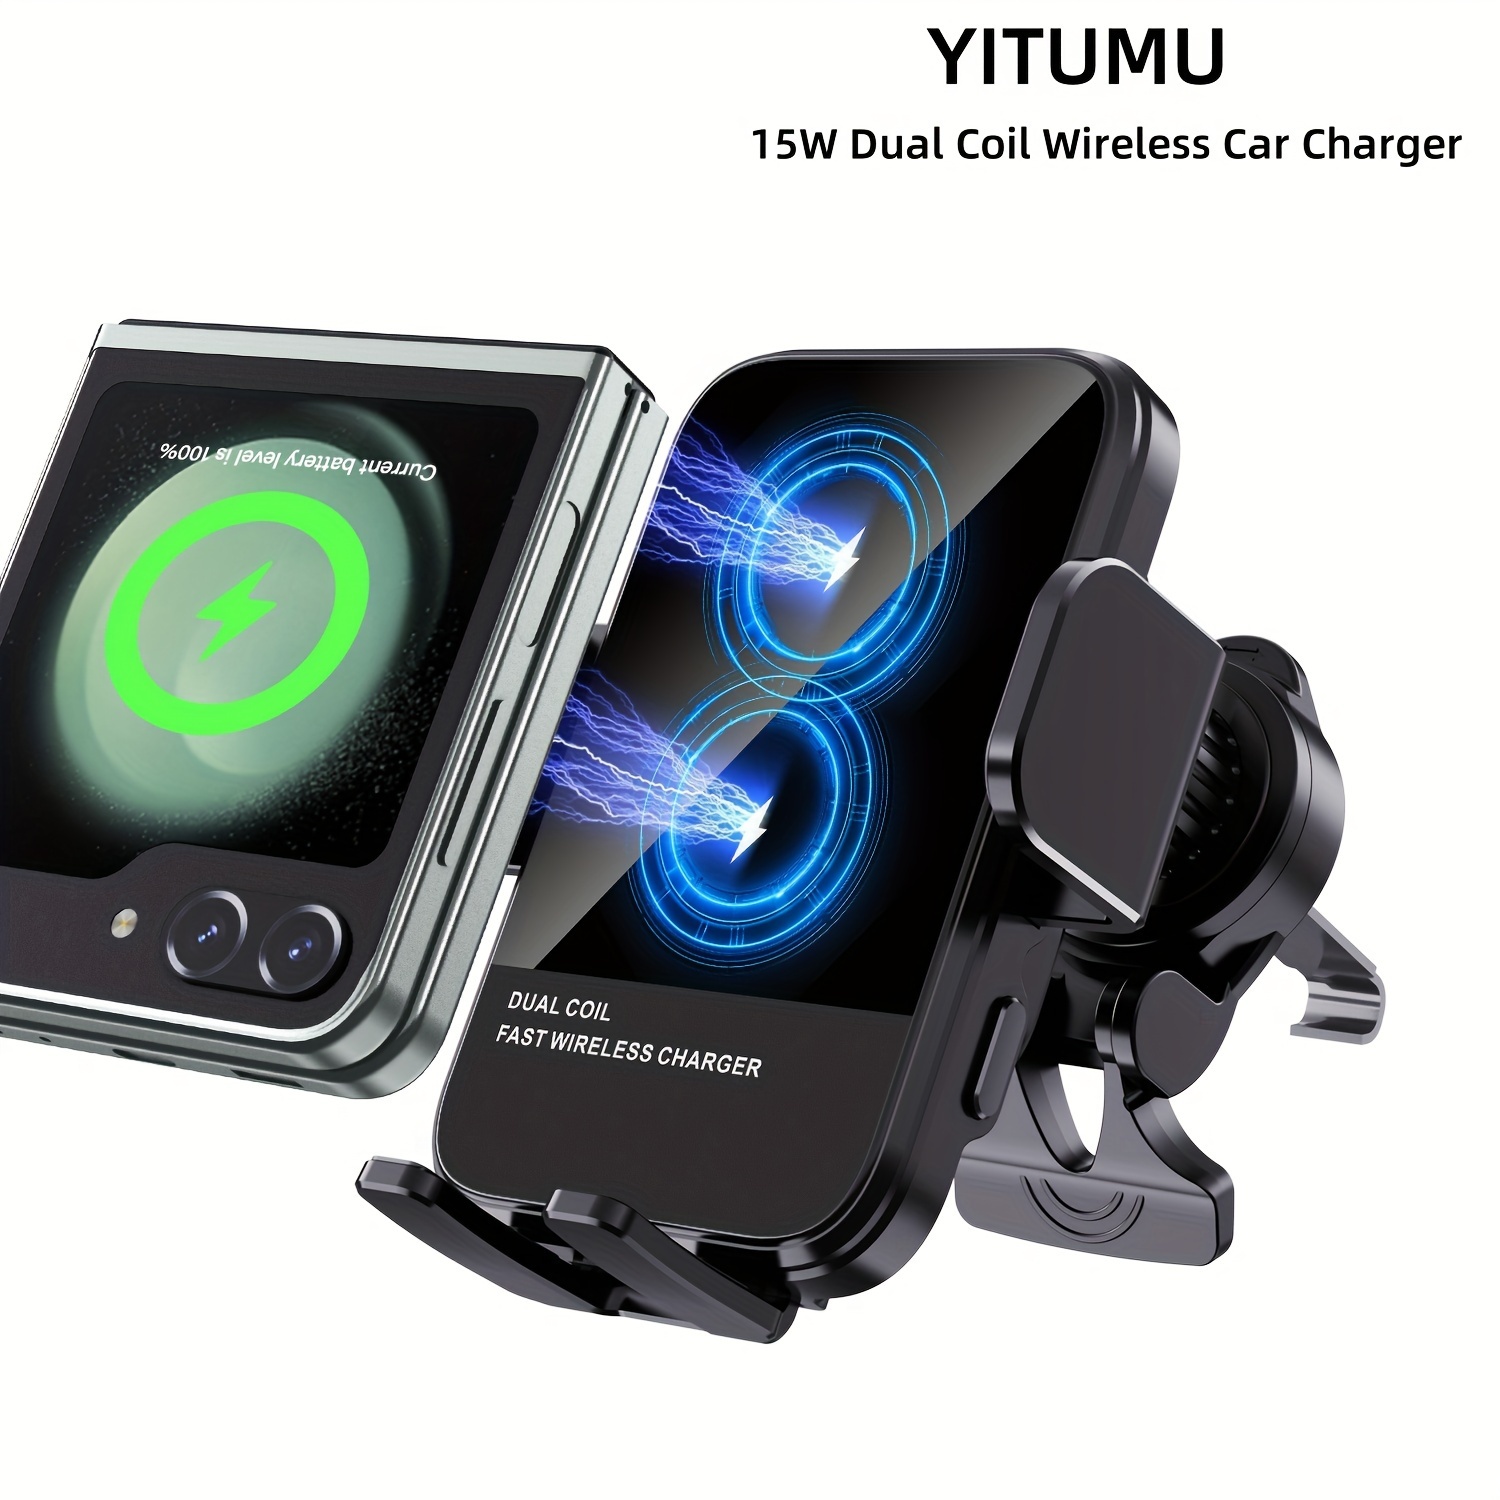 

powerdrive" Yitumu Wireless , Dual Coil 15w Qi Fast Chargingauto Clamping Vent Cradle, For Iphone, For , For Samsung Z Flip Series Foldable Mobile Phones Etc.